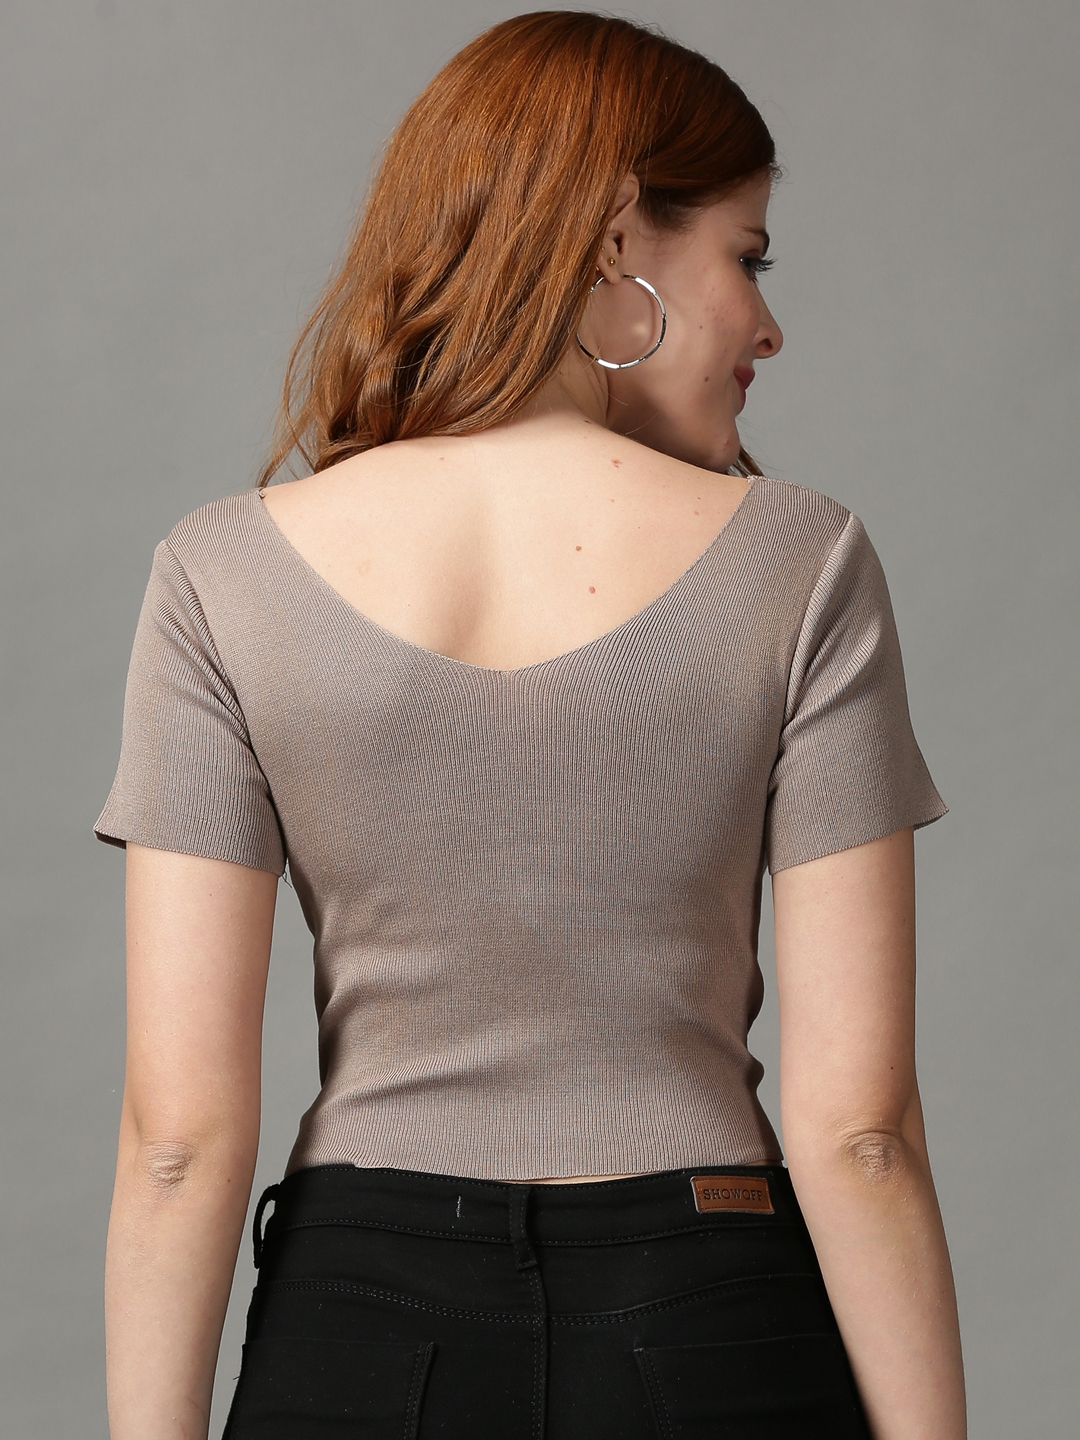 Women's Grey Polyester Solid Tops